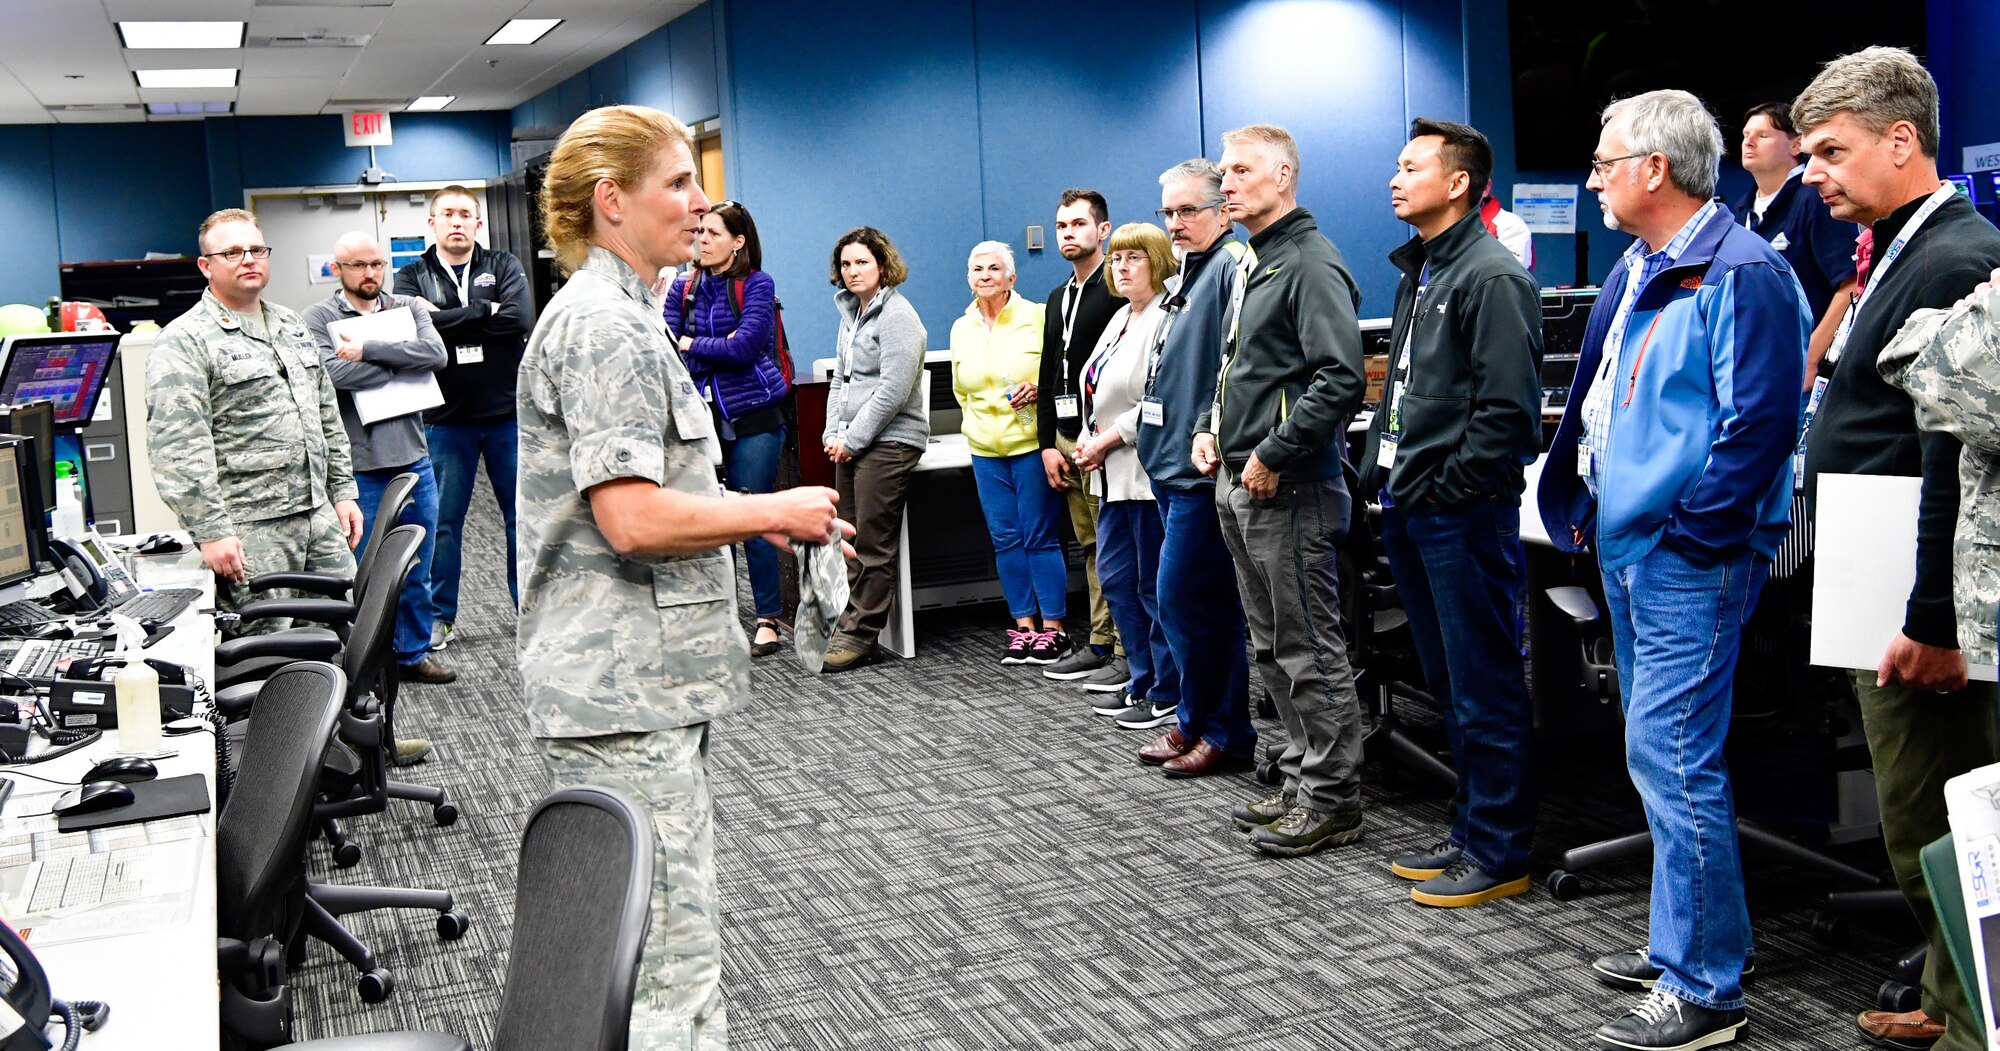 As part of the Employer Support of the Guard and Reserve (ESGR) Bosslift program, civilian employers tour the operations floor of the Western Air Defense Sector June 7, 2018.  Col. Paige Abbott, 225th Support Squadron commander, discusses how the WADS guards America's skies 24/7.  (U.S. Air National Guard photo by Capt. Colette Muller)